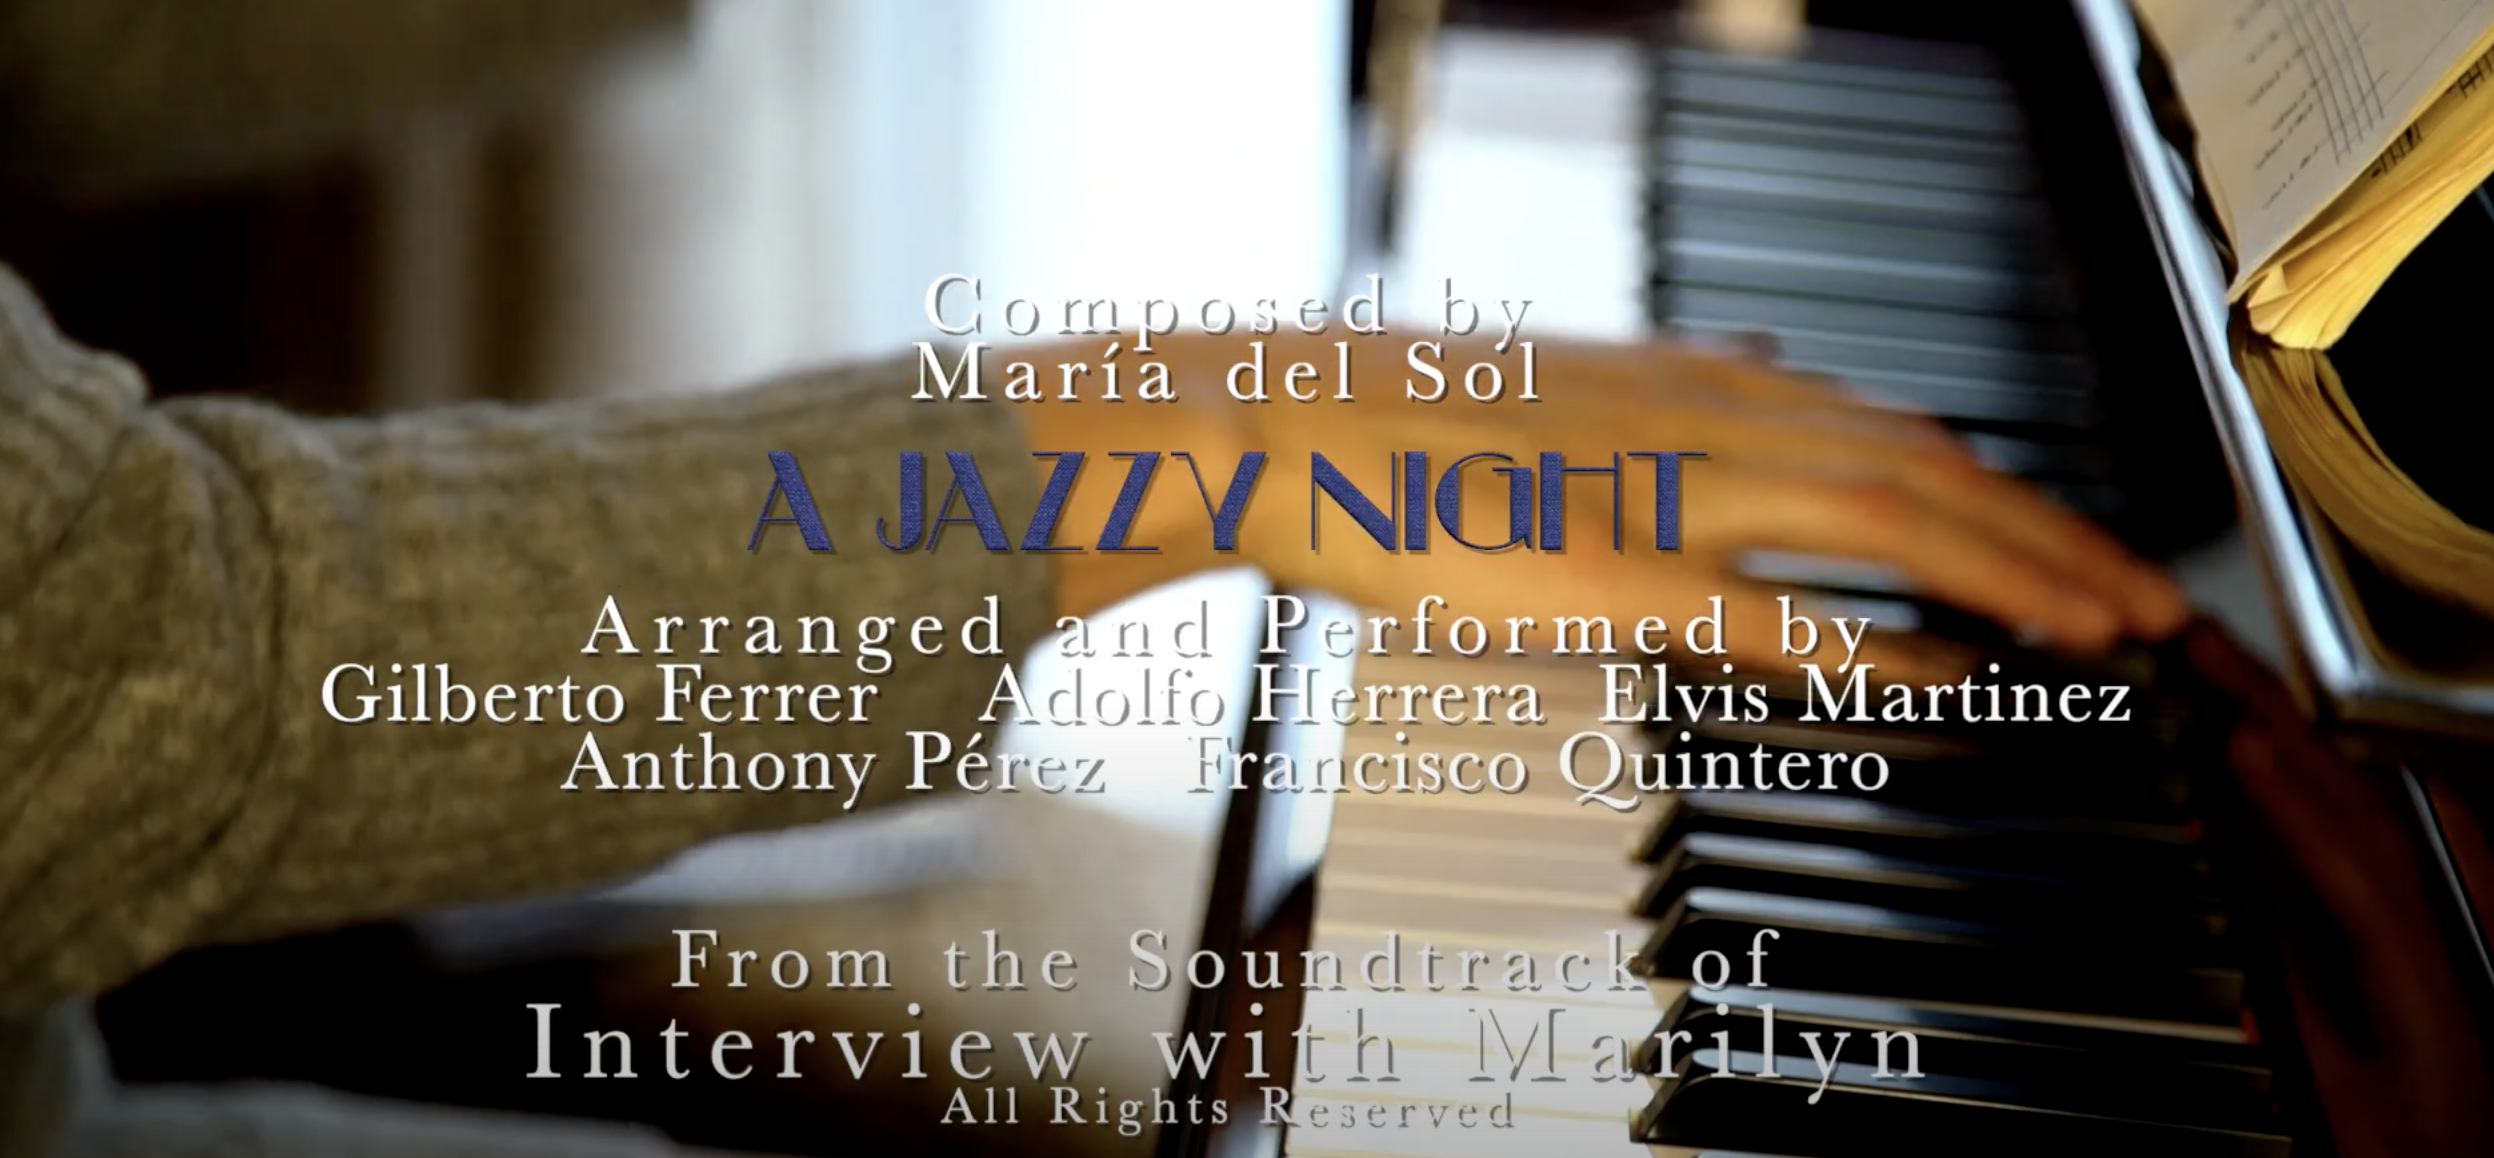 A Jazzy Night, from the Soundtrack of the film Interview with Marilyn